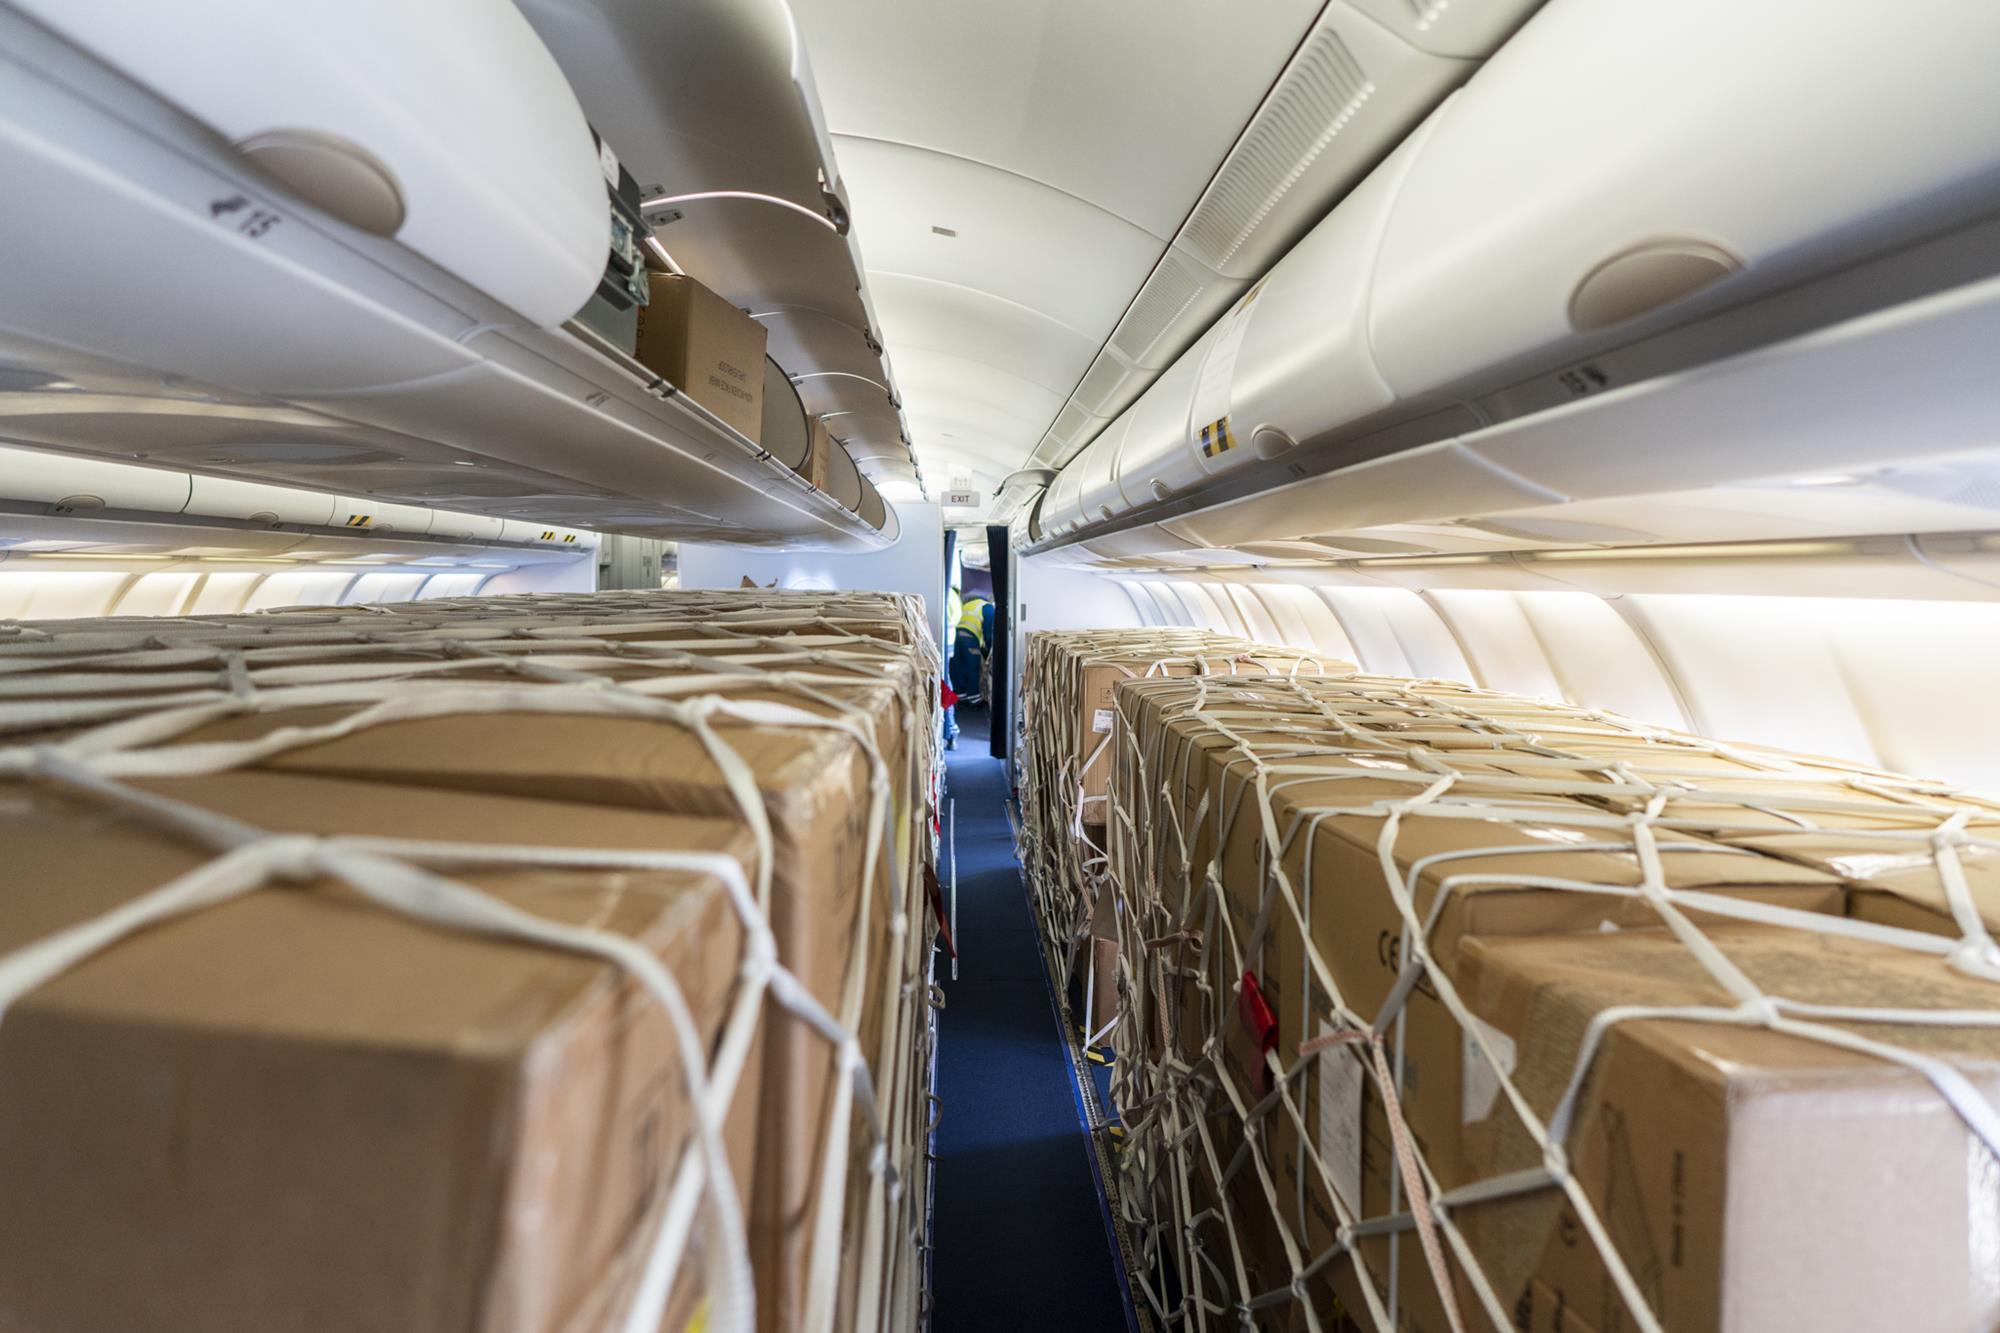 PharmaBoardroom - Arm Doors and Cross-Check: What the Health Sector Can  Learn from the Post-COVID Airline Industry Debacle